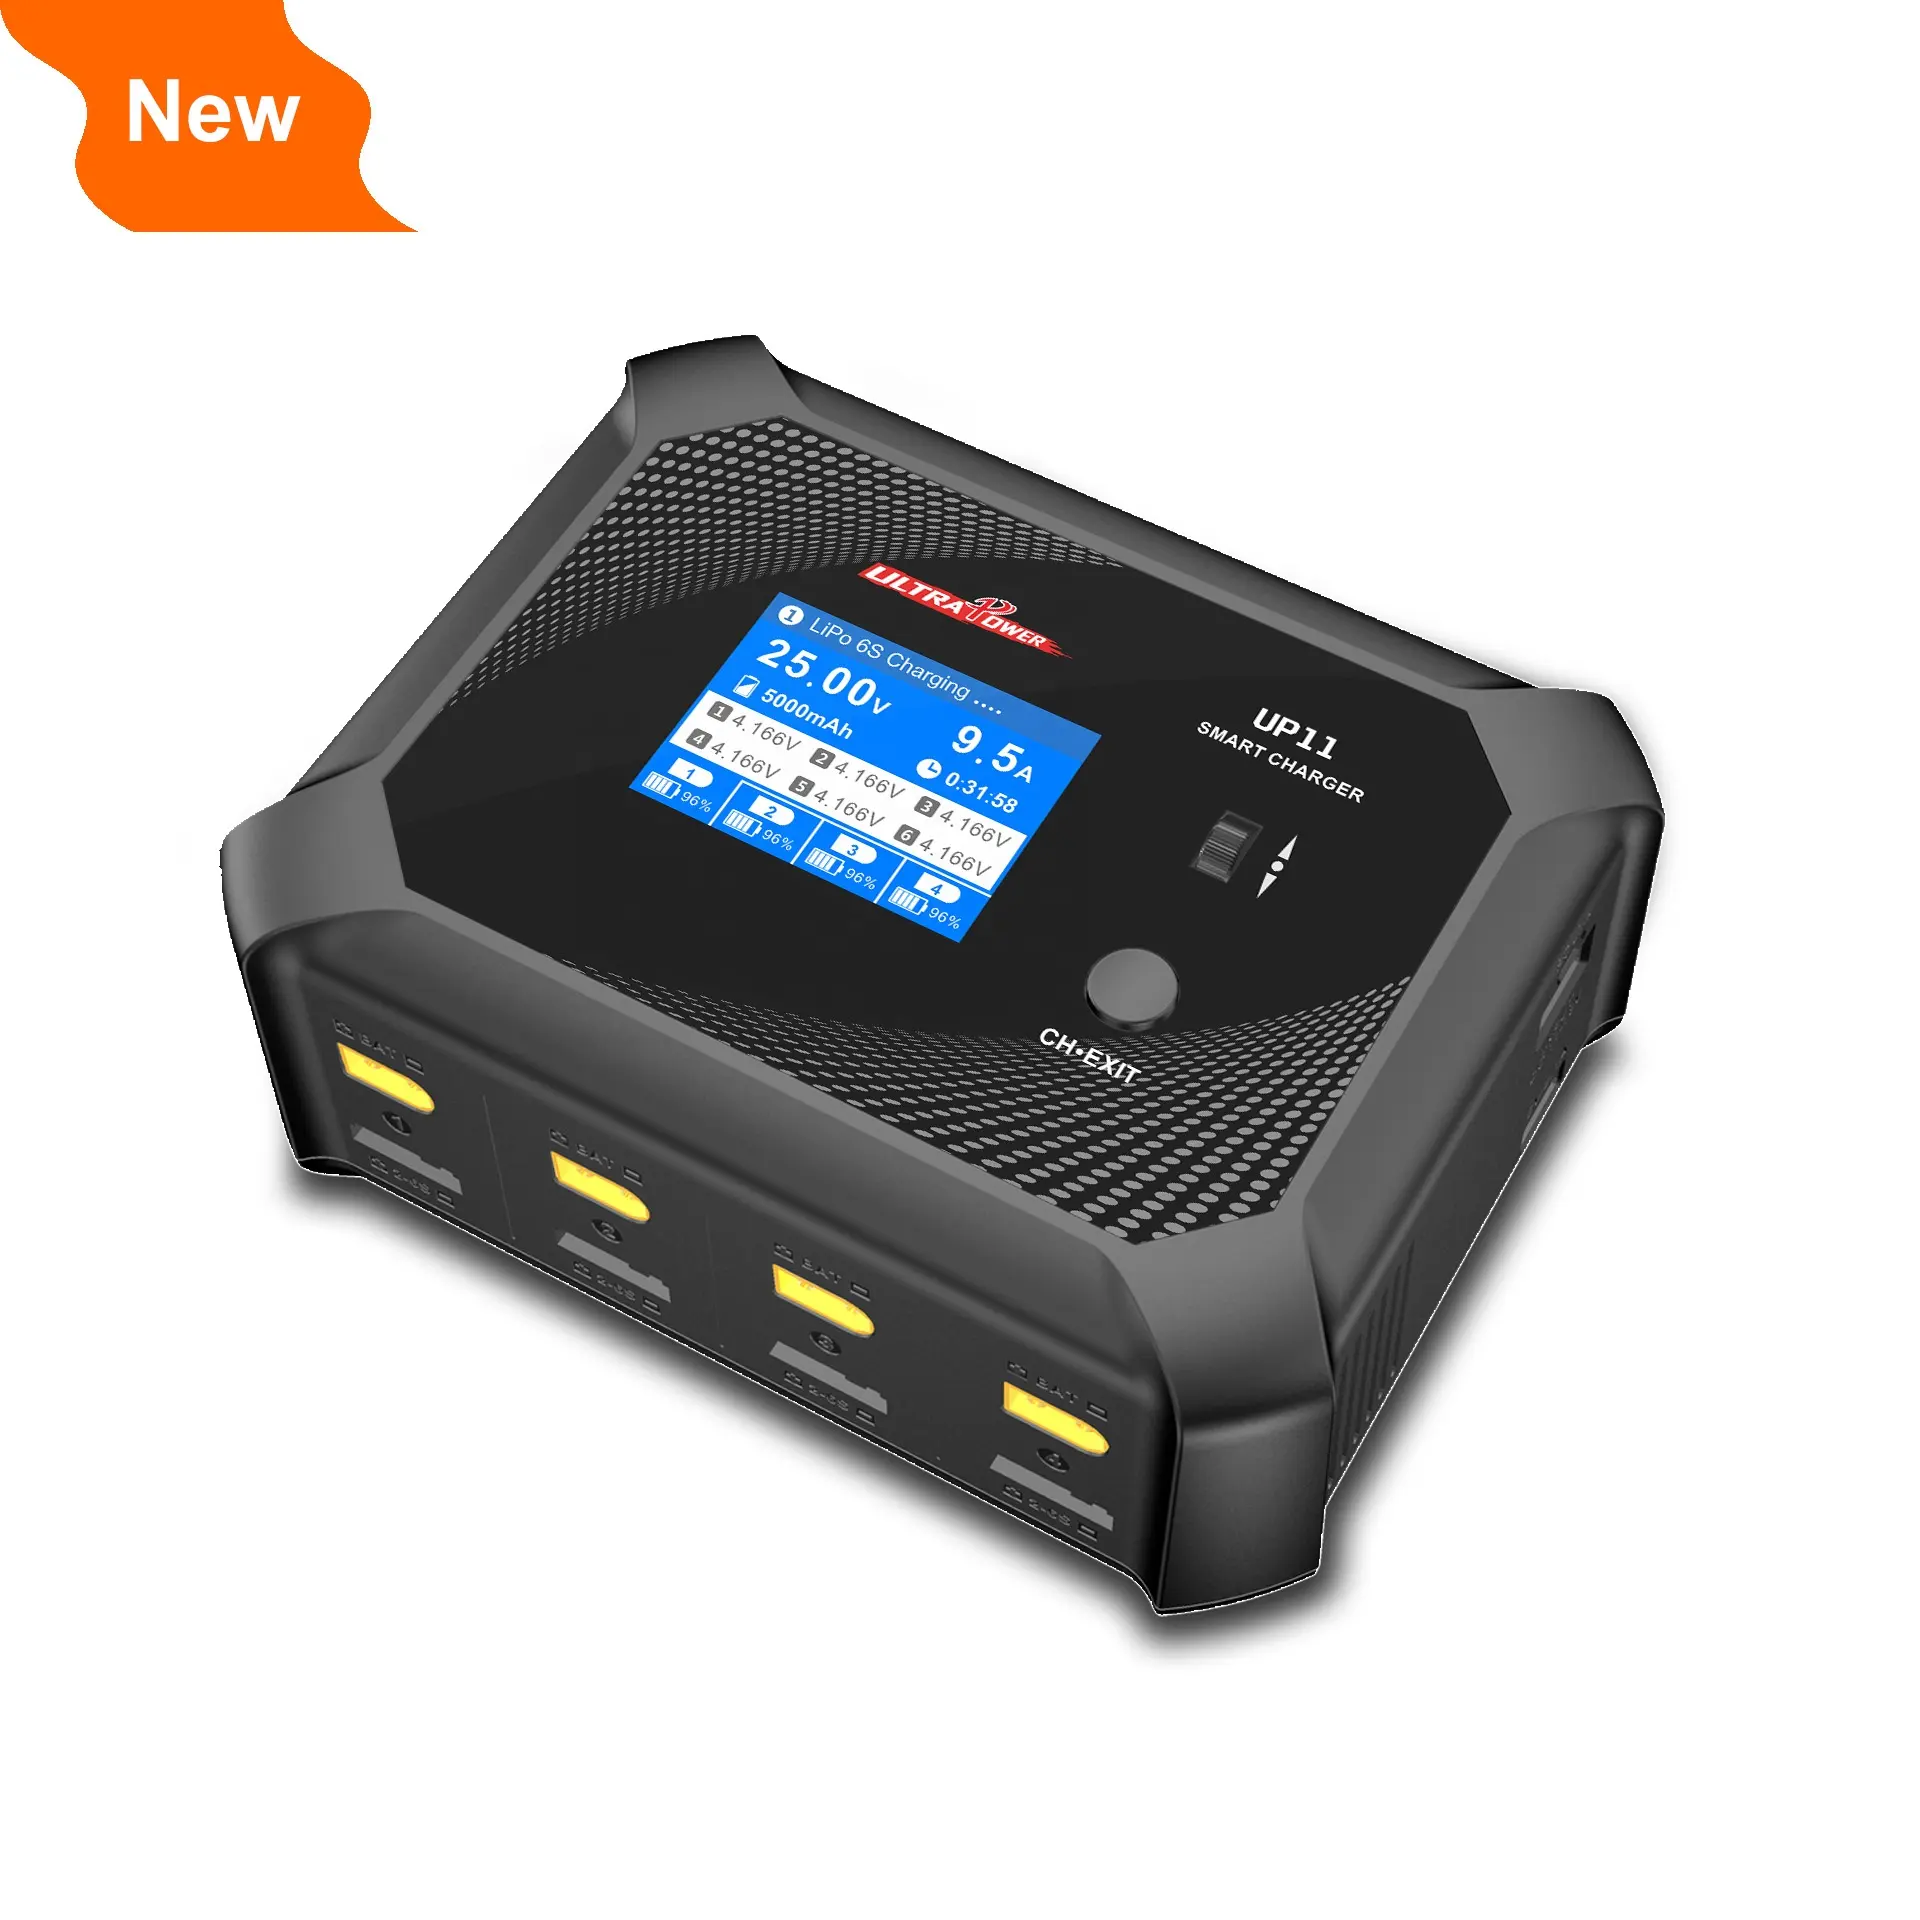 Ultra Power new hot item UP11 600W Four Channels Smart AC DC Blance Smart Charger support 2-6s LiPo RC battery charger